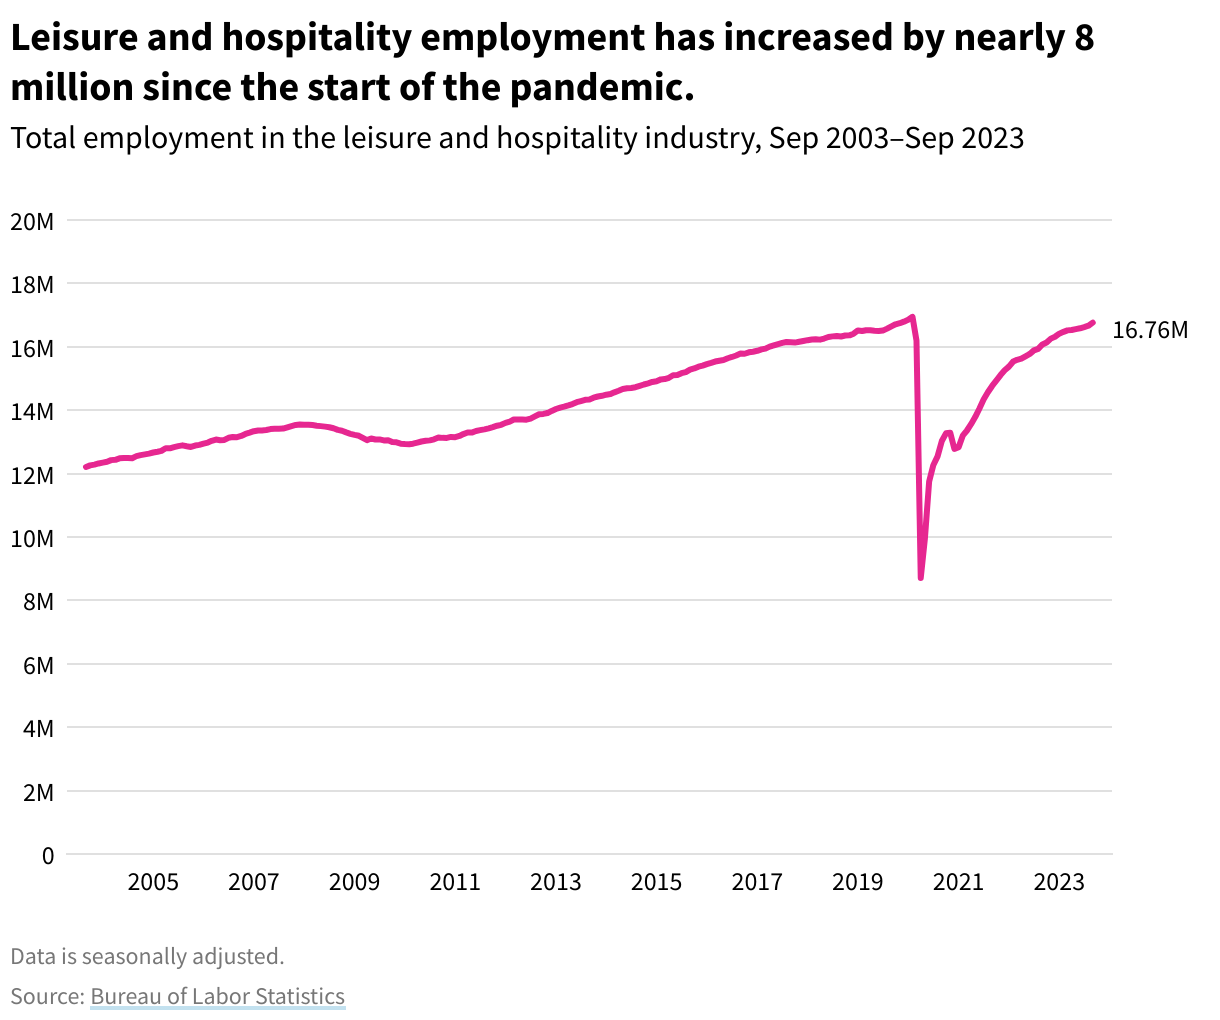 Line graph showing leisure and hospitality employment from 2013 to 2023, with an increase of nearly 8 million since the start of the pandemic. 